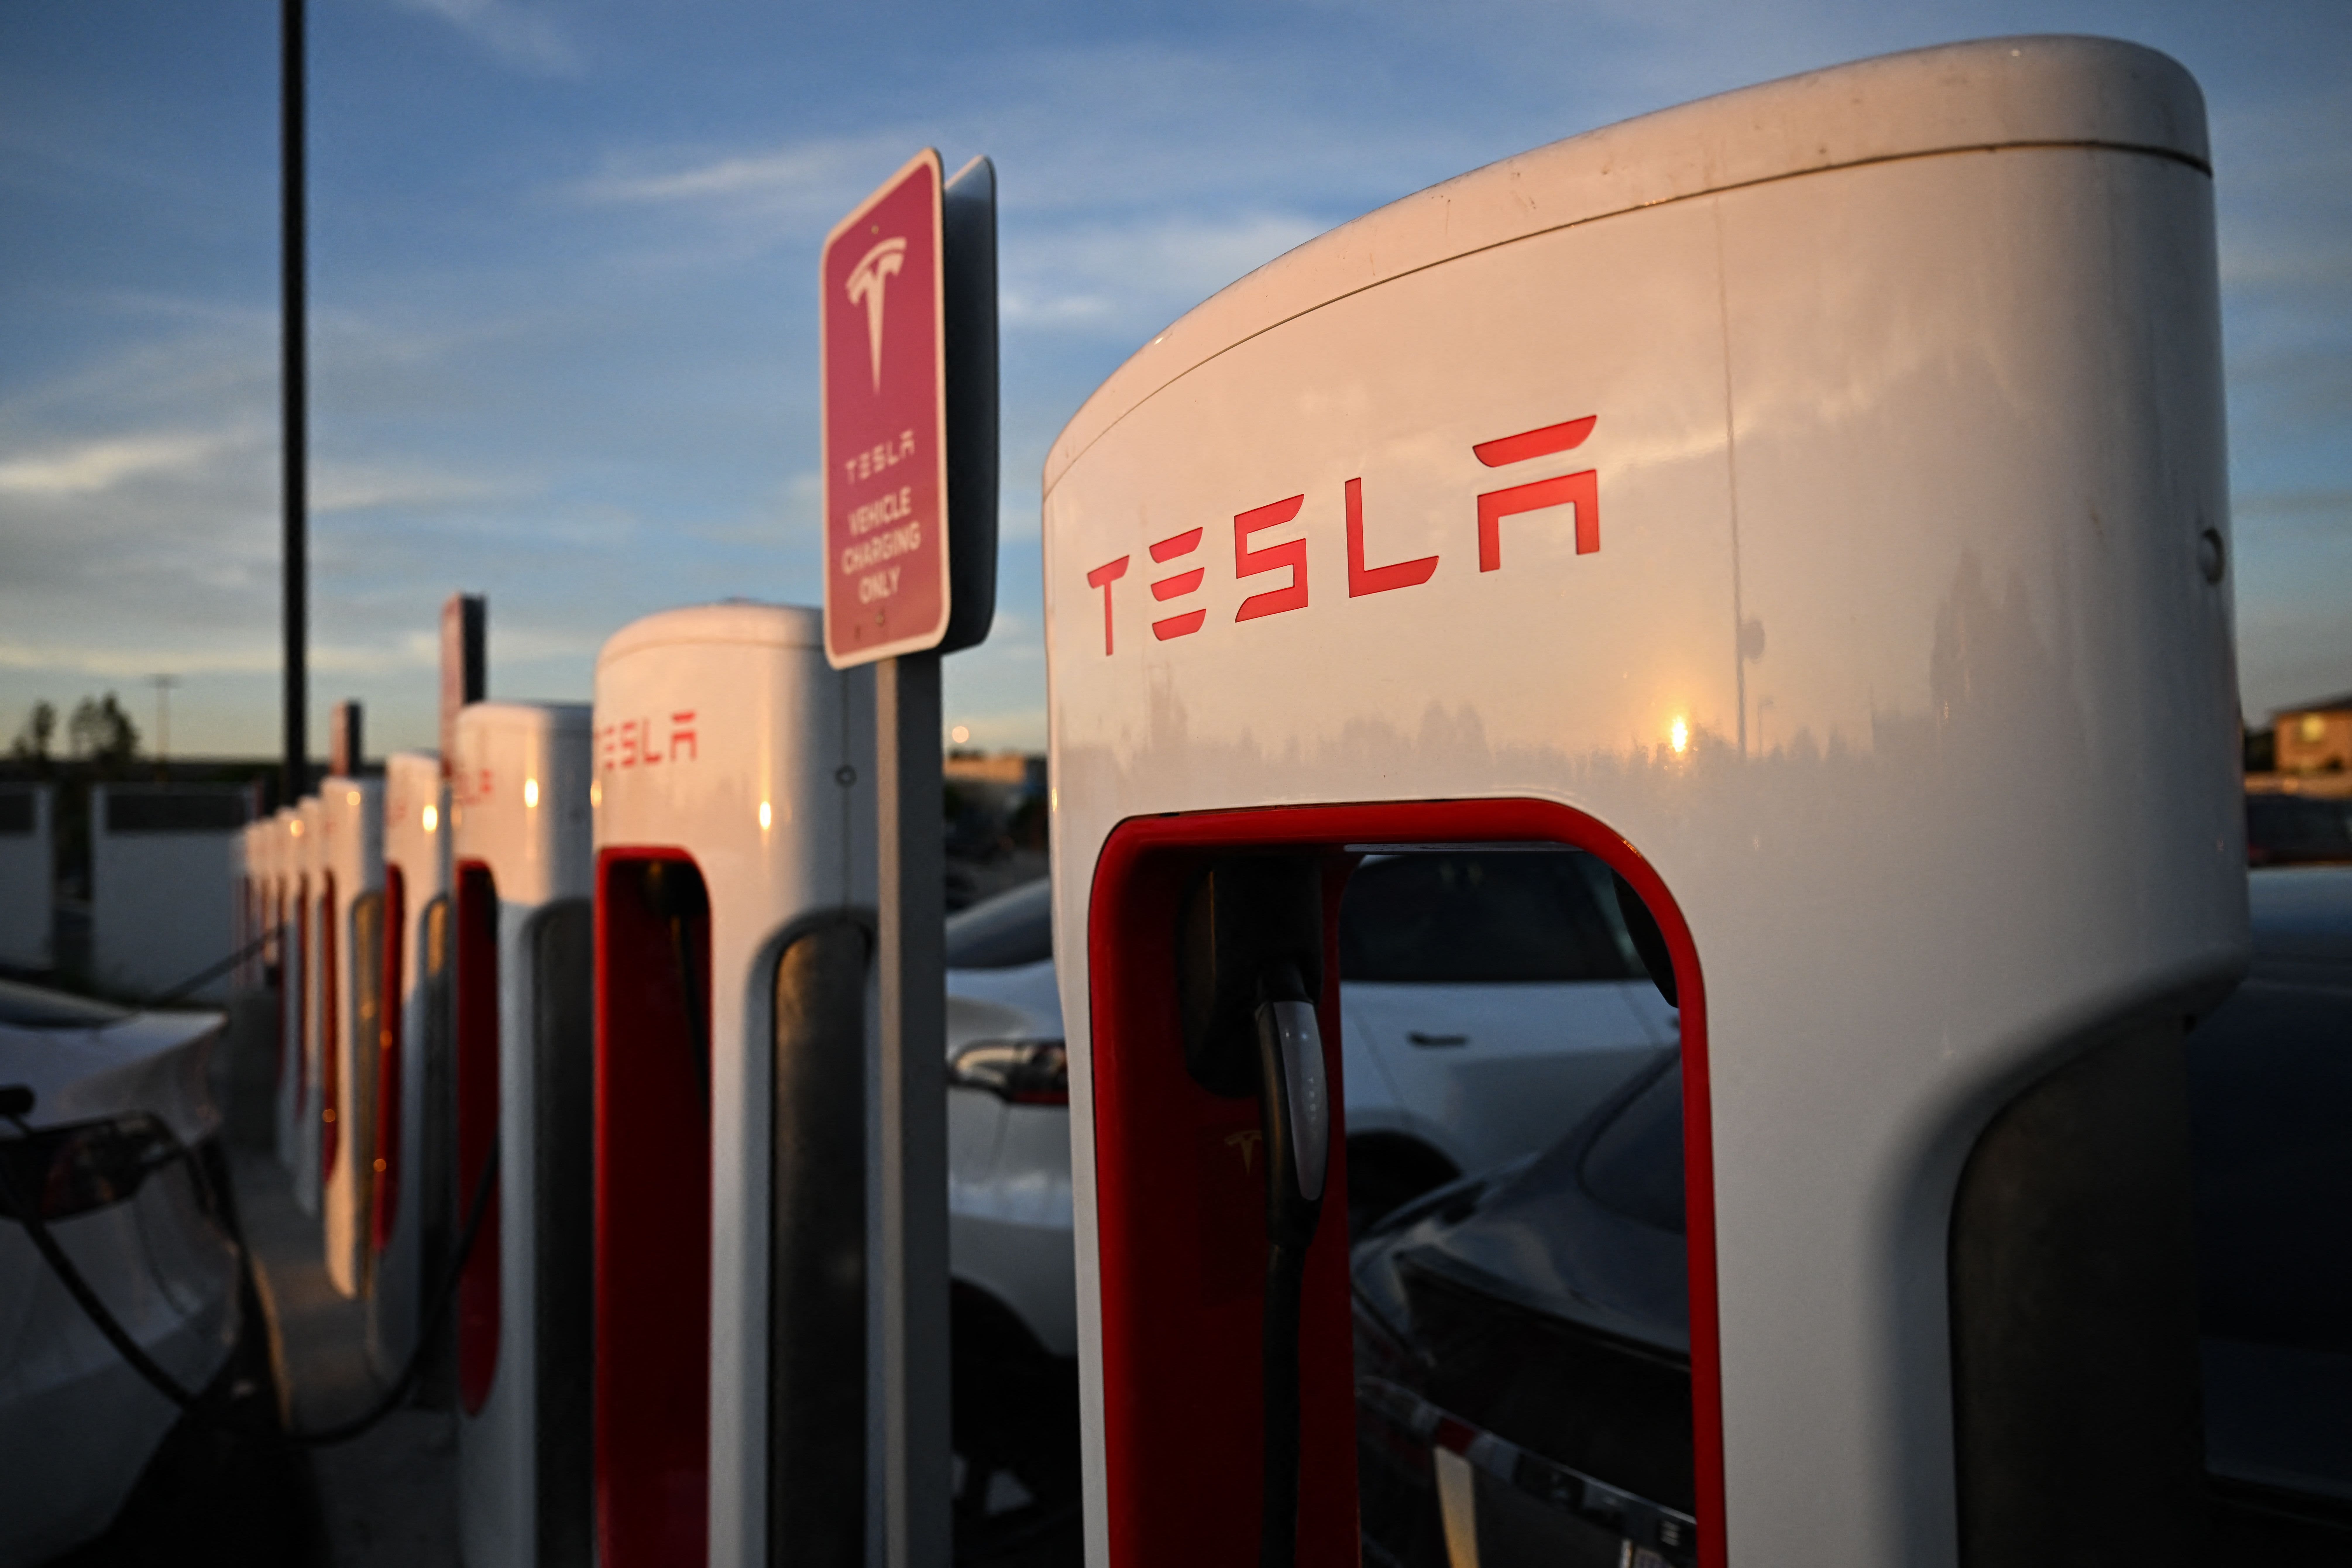 Want a Tesla alternative? Analysts and fund managers reveal their top EV stocks